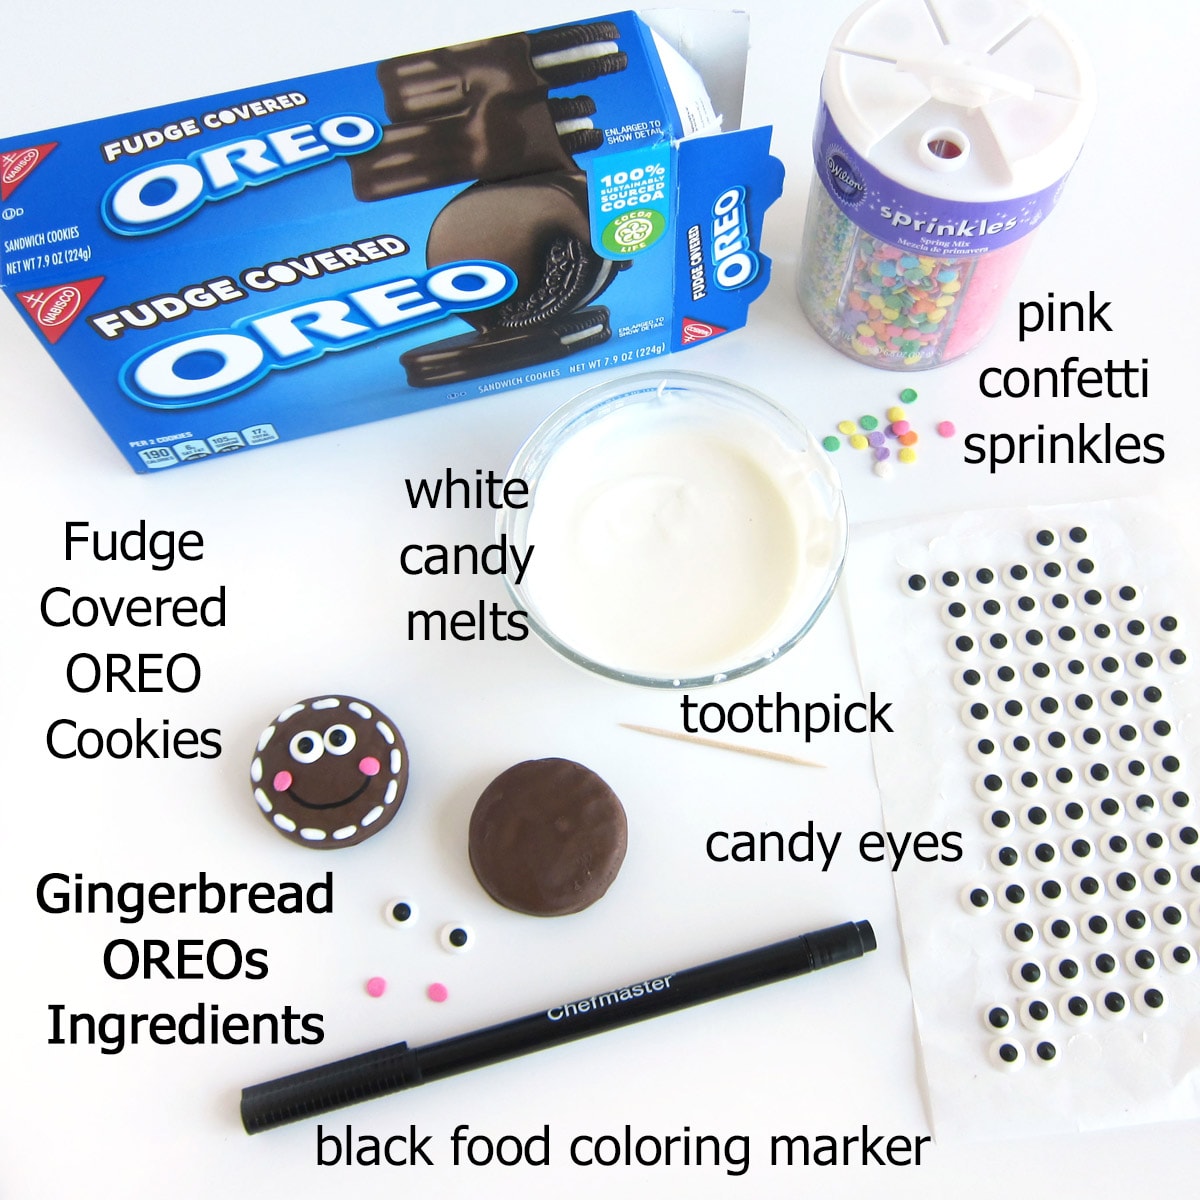 gingerbread OREOs ingredients including fudge covered OREO cookies, pink confetti sprinkles, white candy melts, candy eyes, and black food coloring marker. 